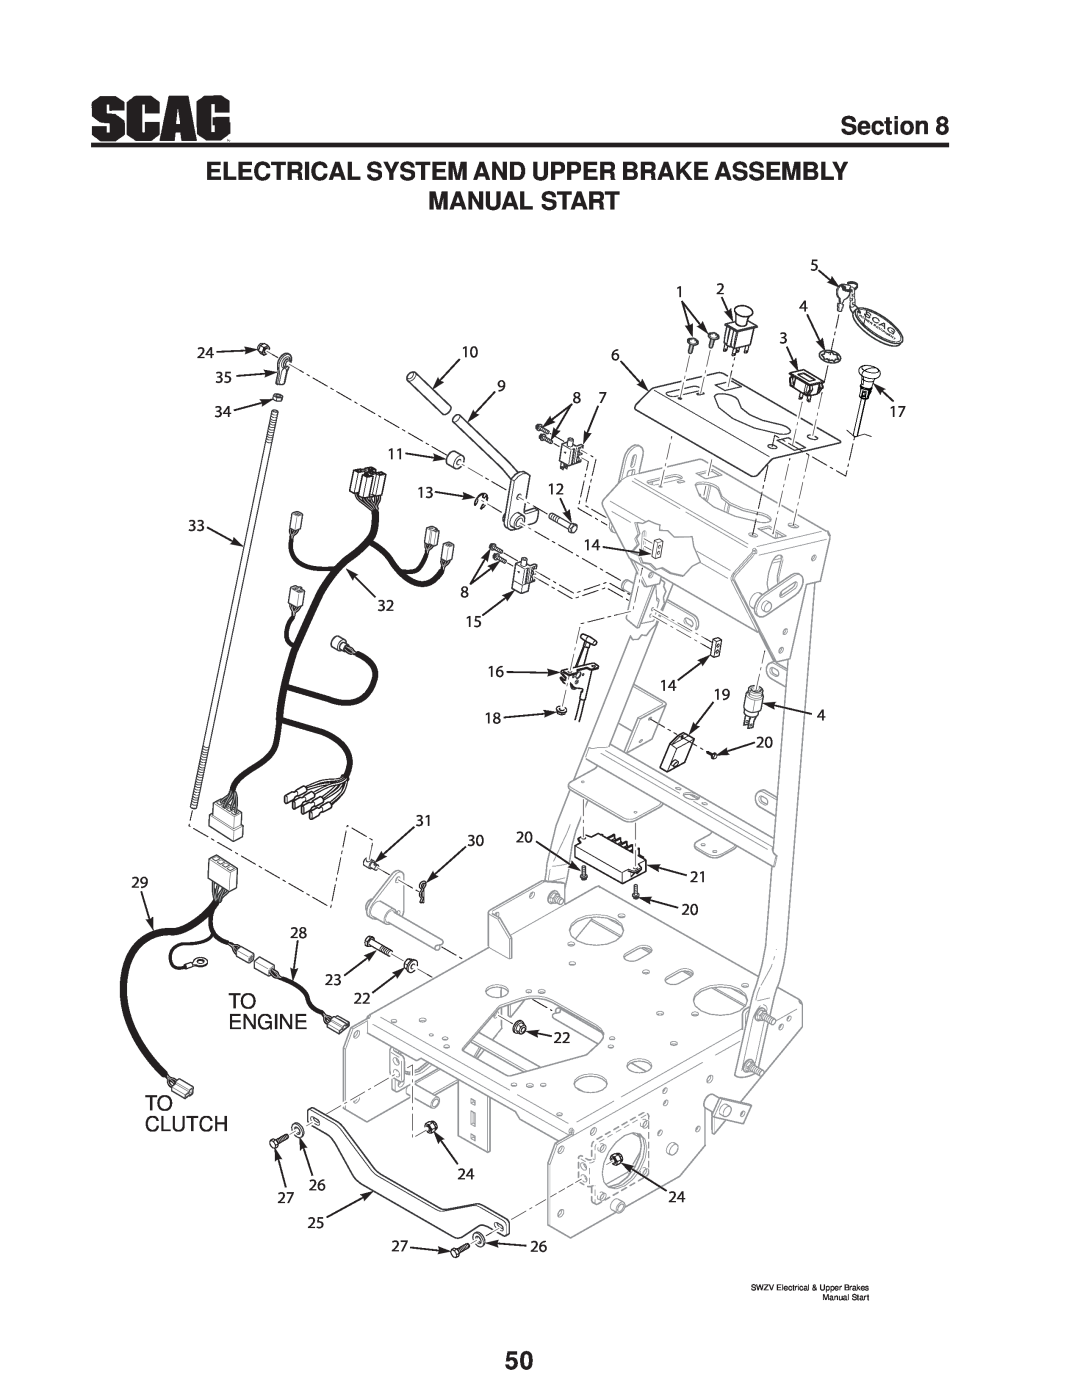 Scag Power Equipment SWZV manual Section ELECTRICAL SYSTEM AND UPPER BRAKE ASSEMBLY MANUAL START, To Clutch, Scag, Ment 